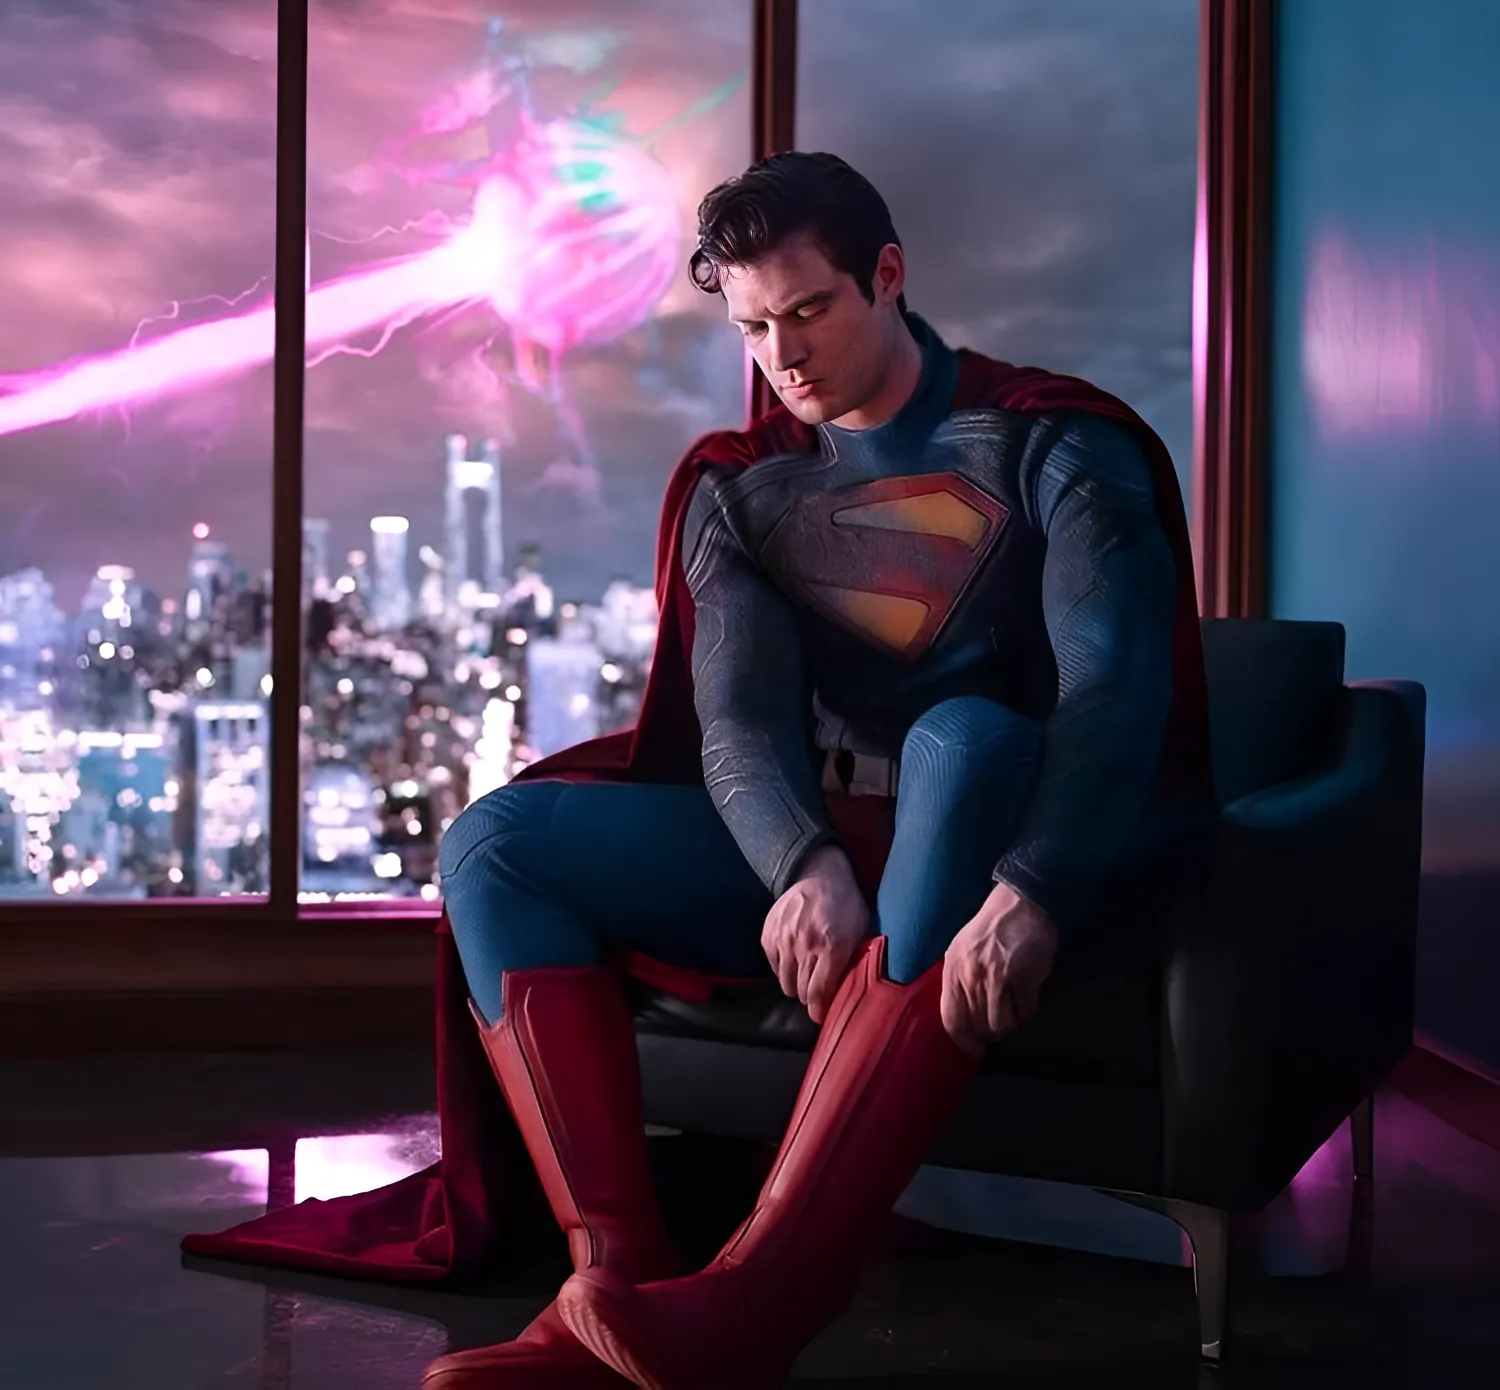 Dc Reveals First Glimpse At David Corenswet'S Superman Costume, And It'S Looking Fire